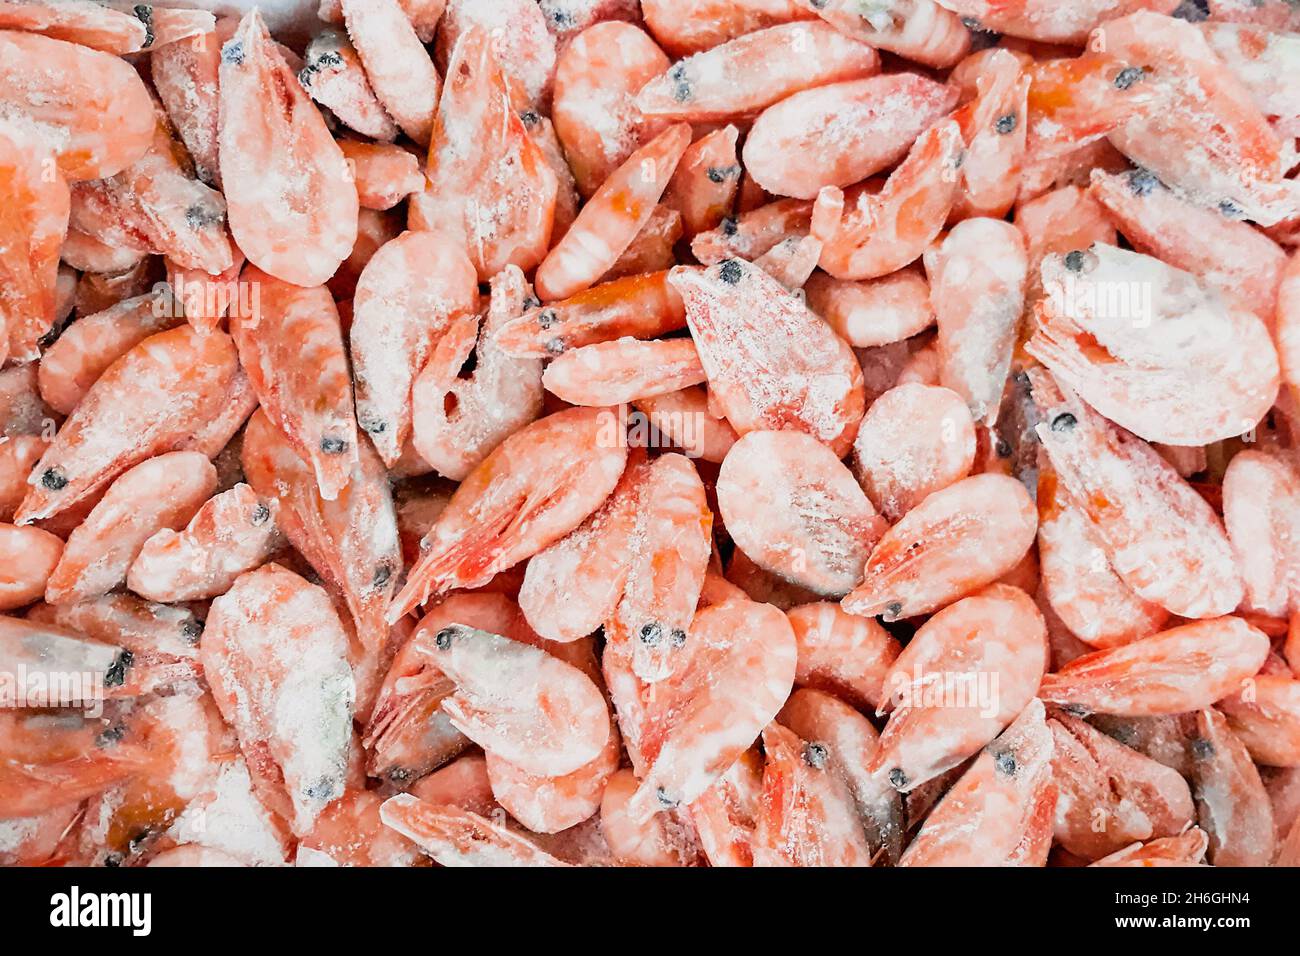 Frozen shrimp in the supermarket. Sale of seafood. Eco-friendly organic food. Stock Photo